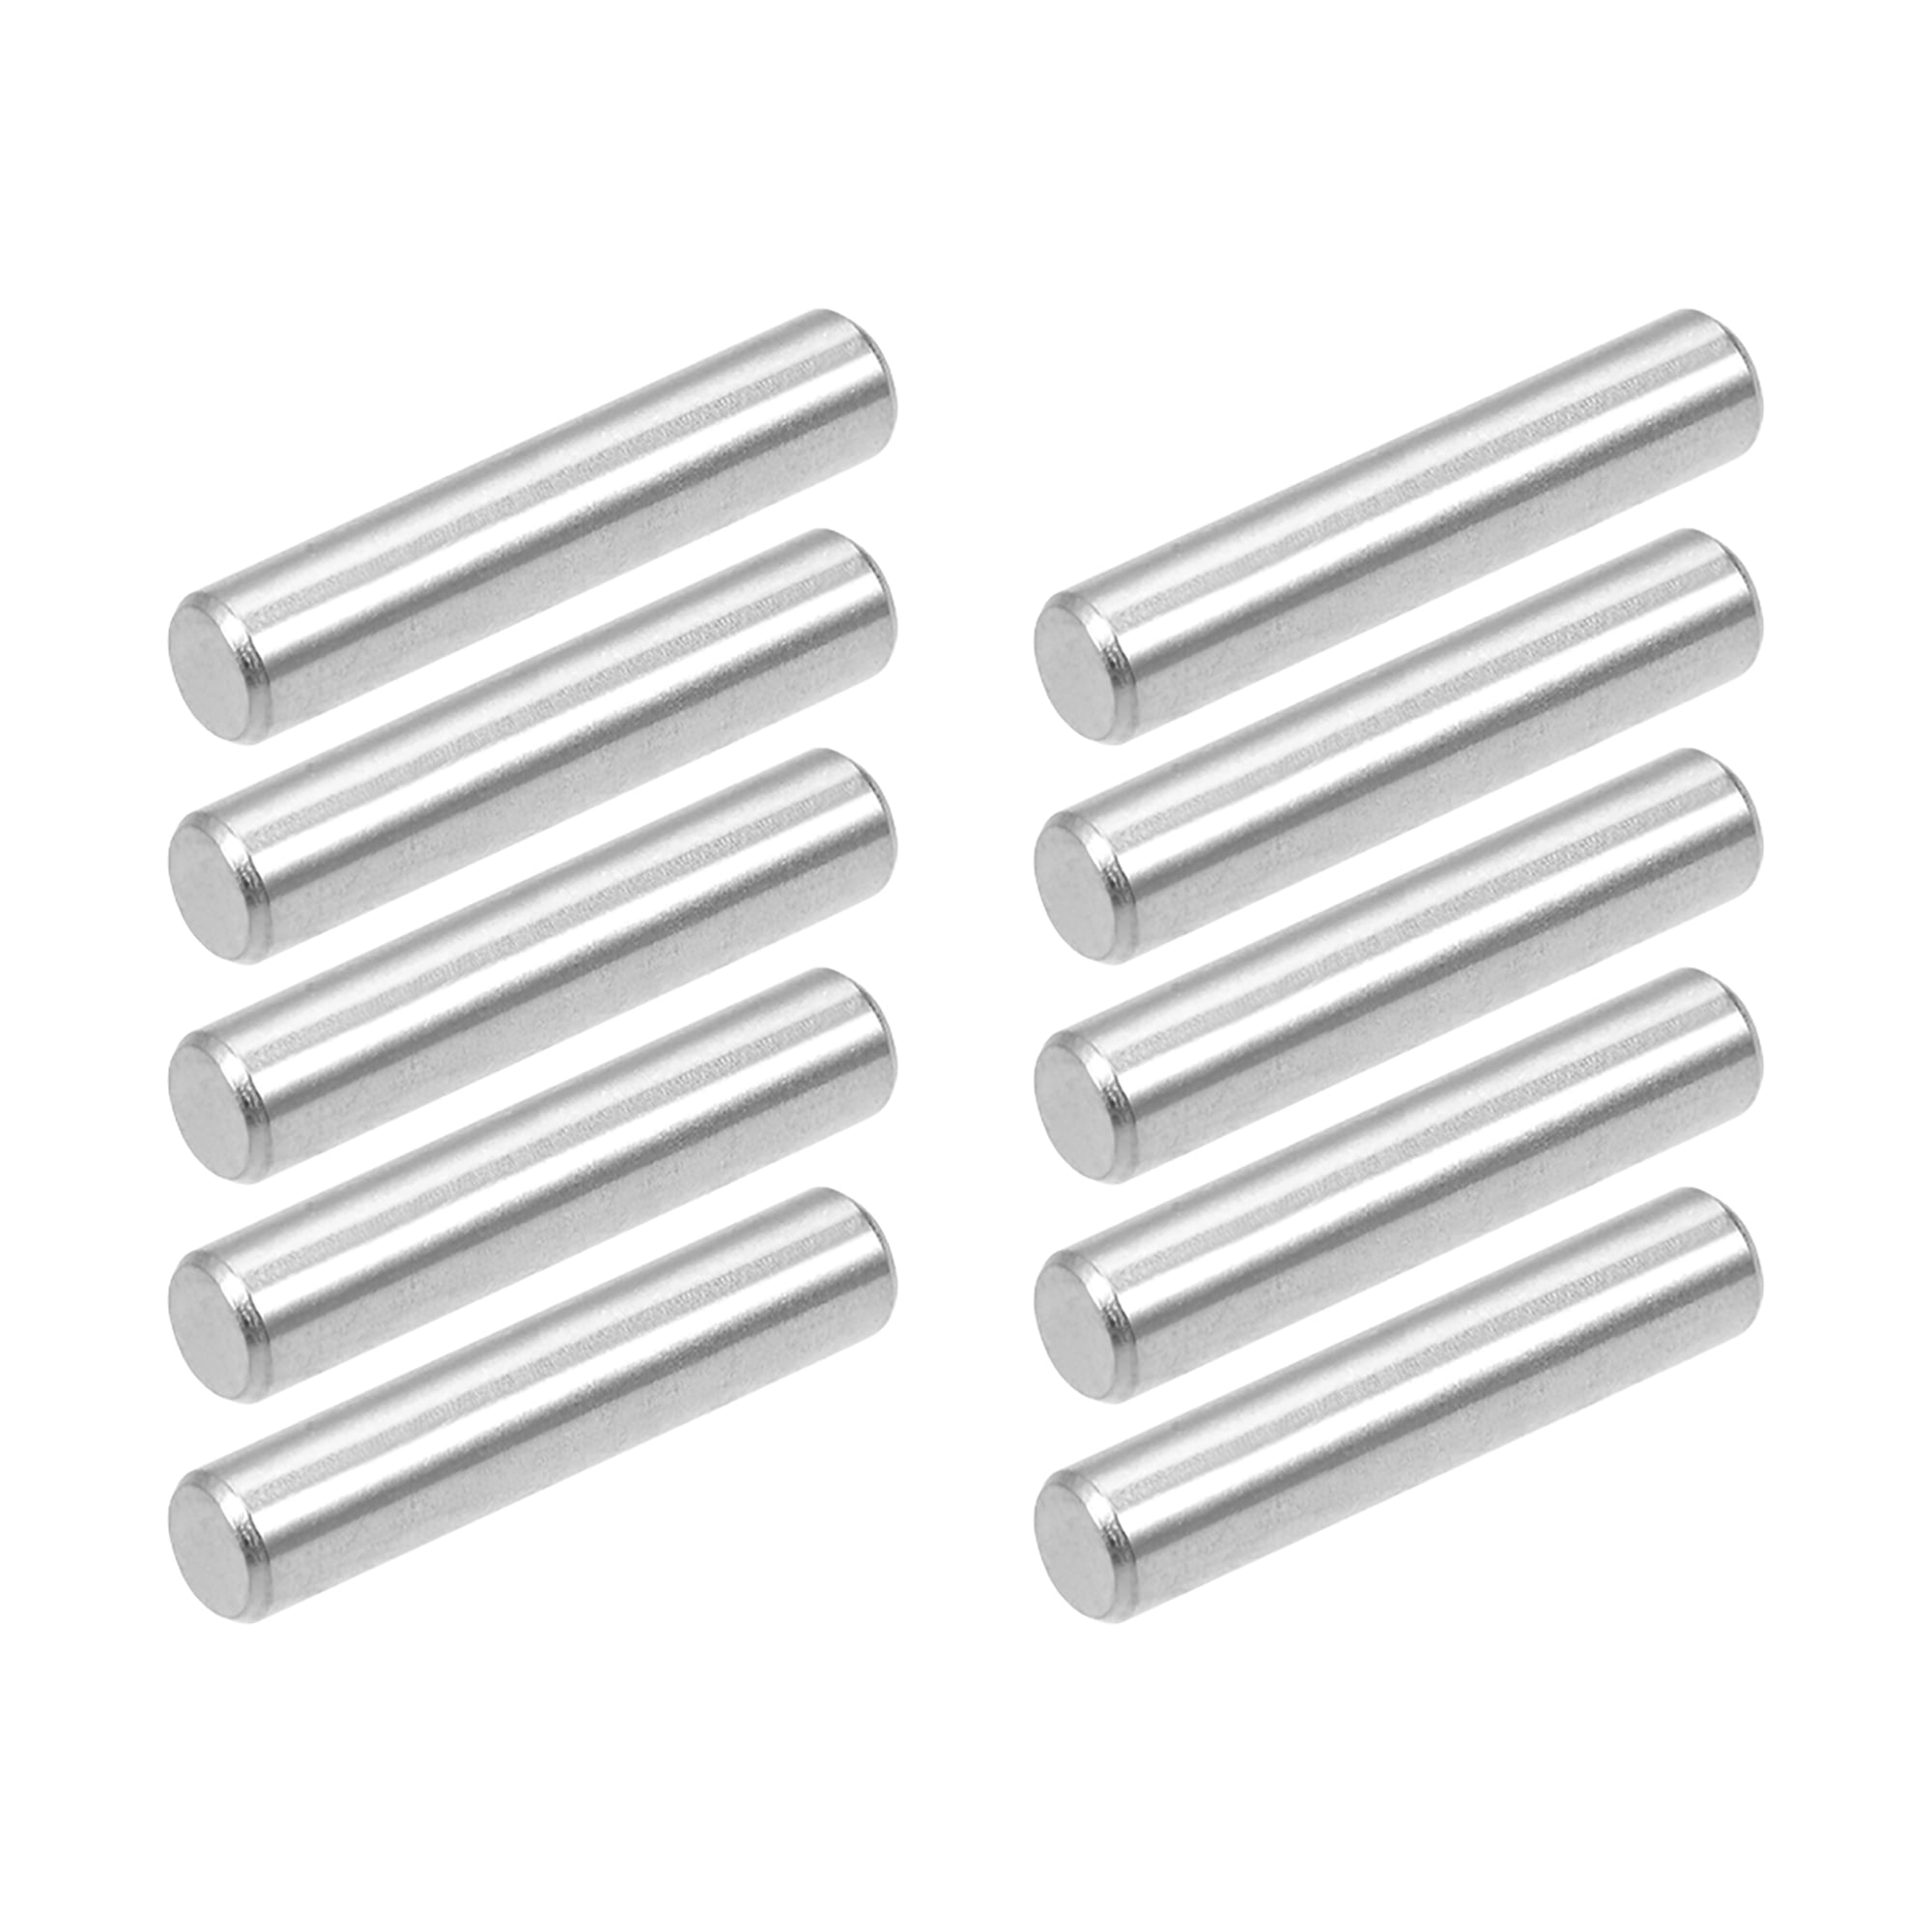 10 PACK! 1/8" W x 9/16" Long Stainless Steel Dowel Pin Rod NH FREE SHIPPING! 